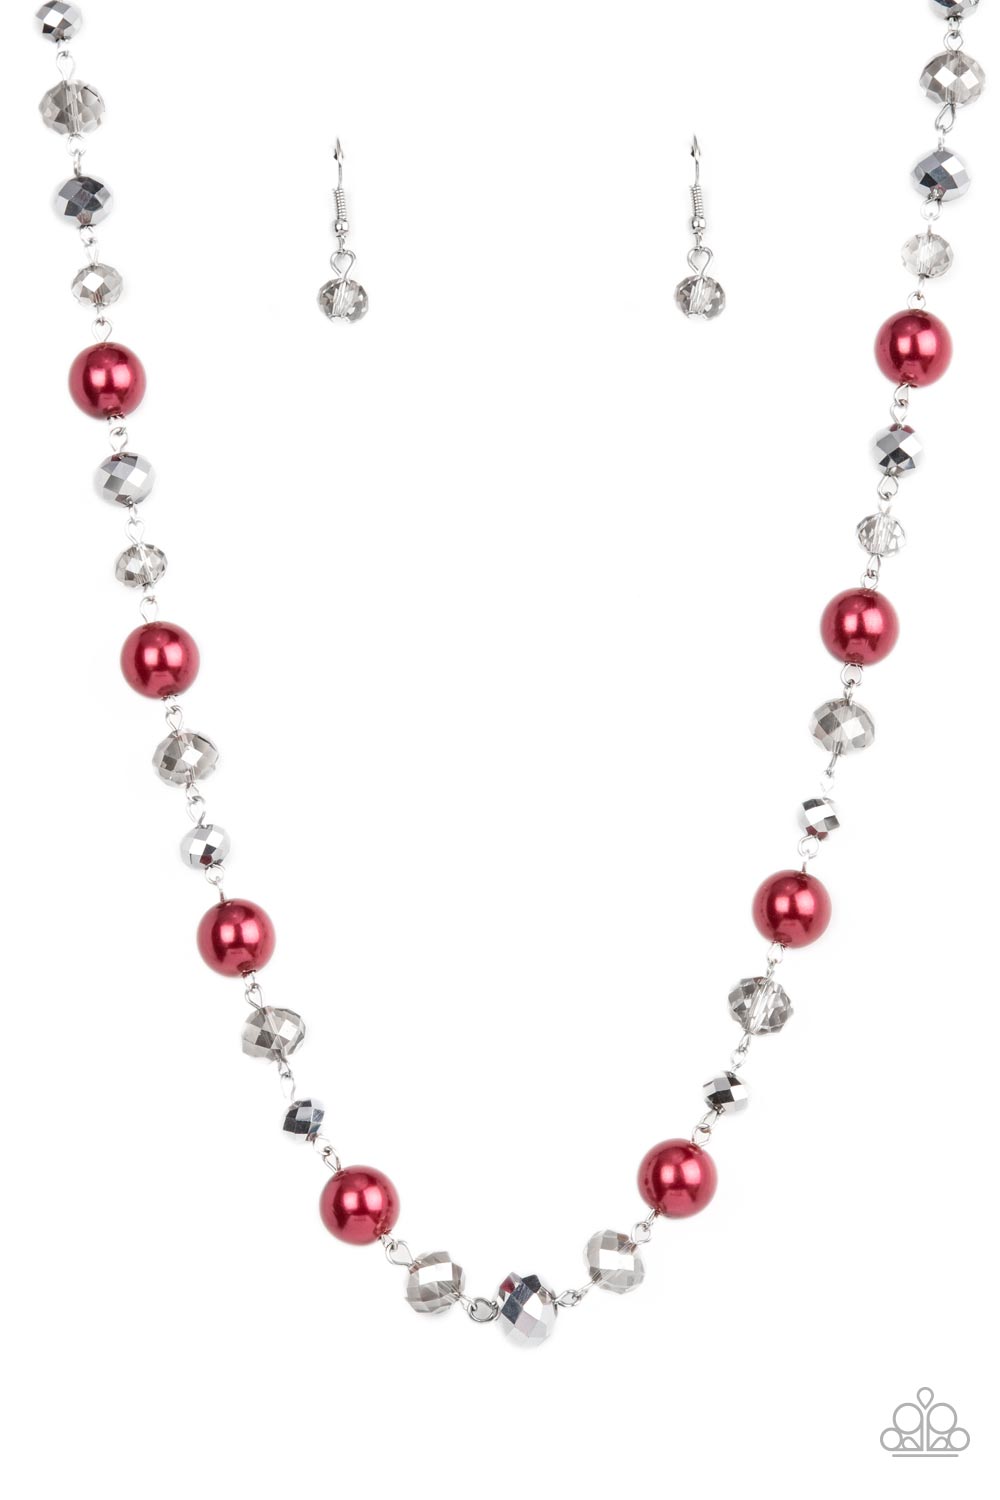 five-dollar-jewelry-decked-out-dazzle-red-paparazzi-accessories